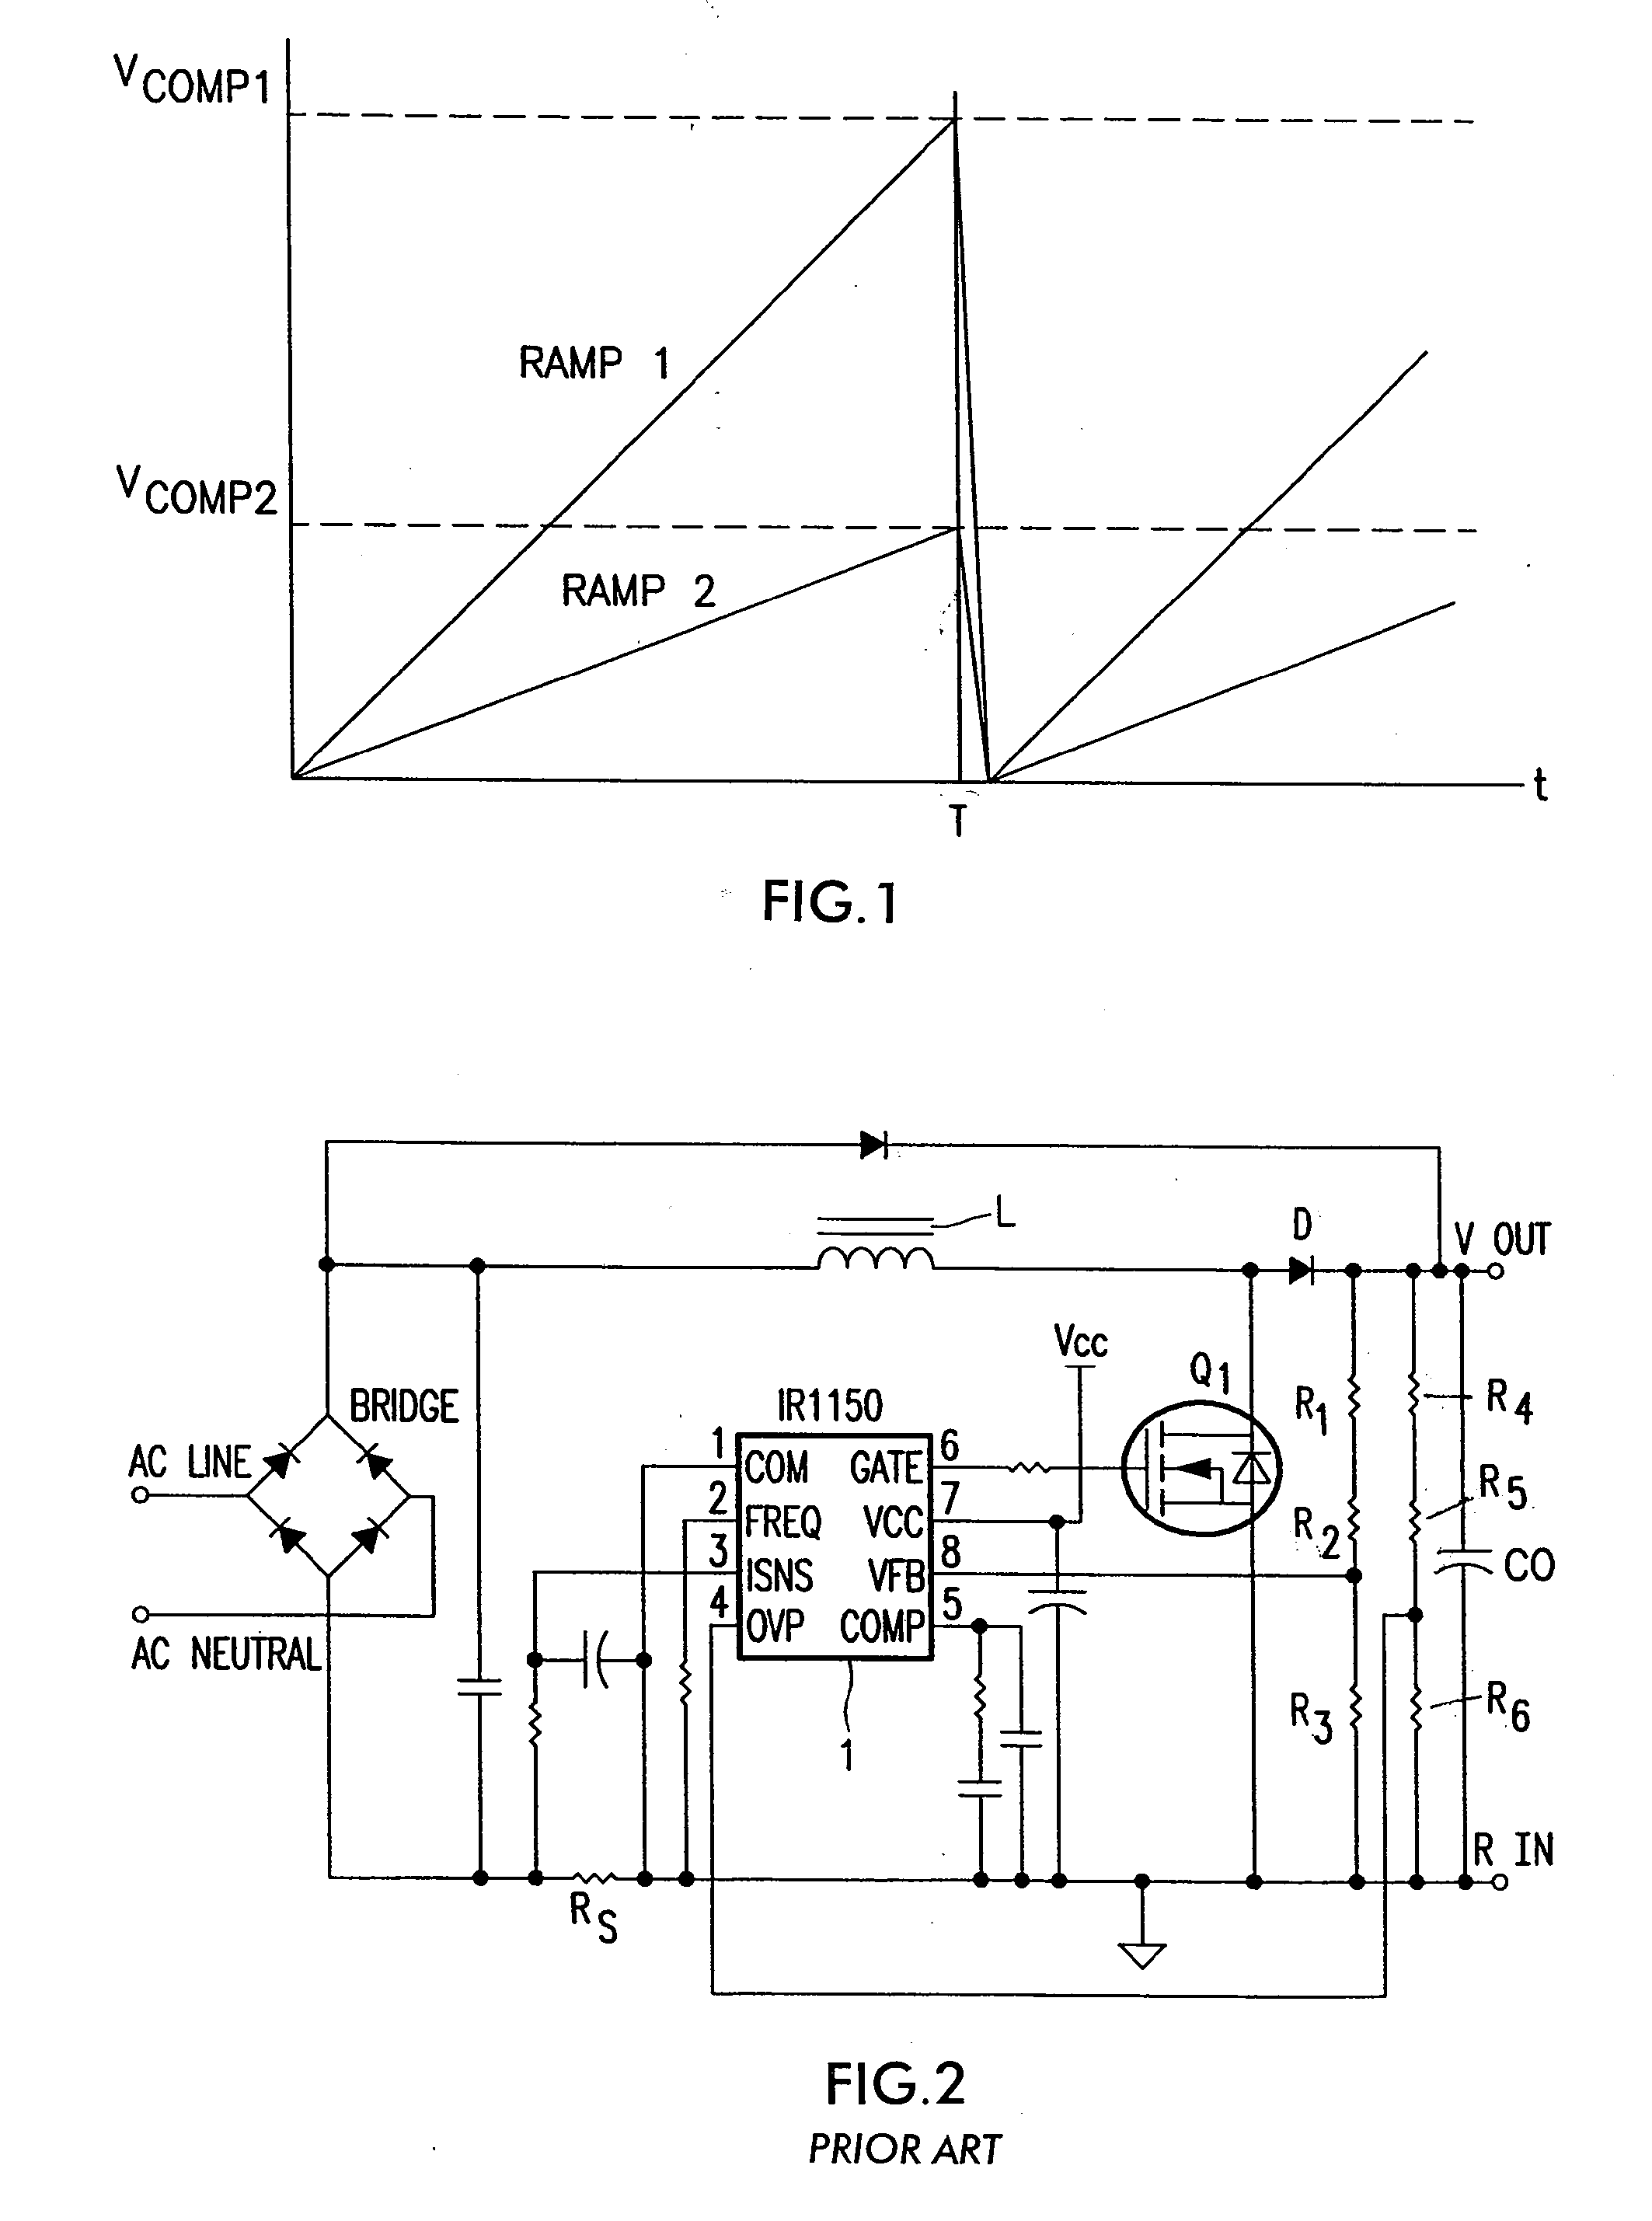 Merged ramp/oscillator for precise ramp control in one cycle pfc converter